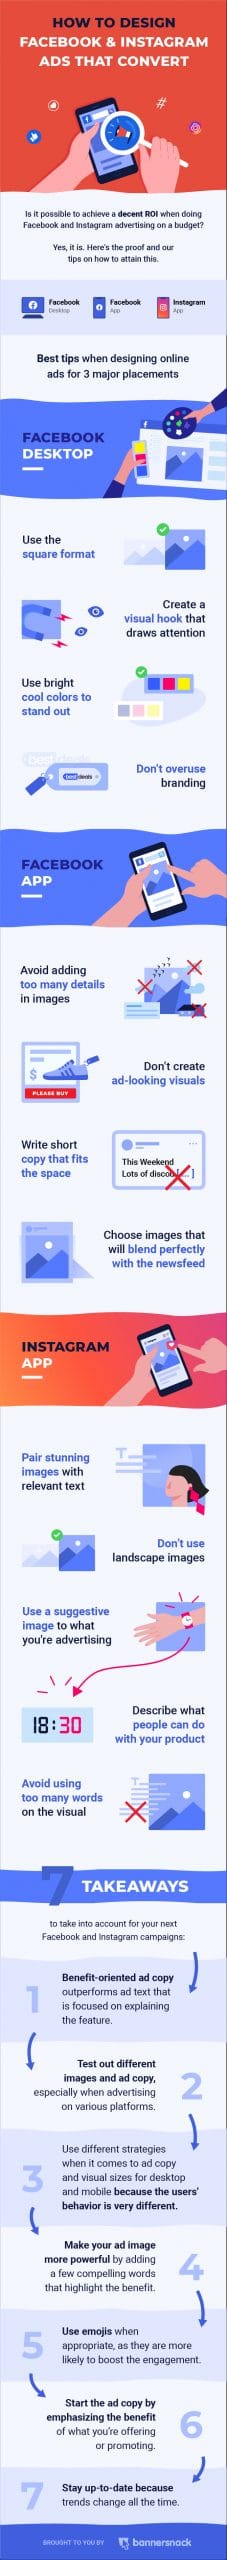 Design Compelling Facebook and Instagram Ads Infographic